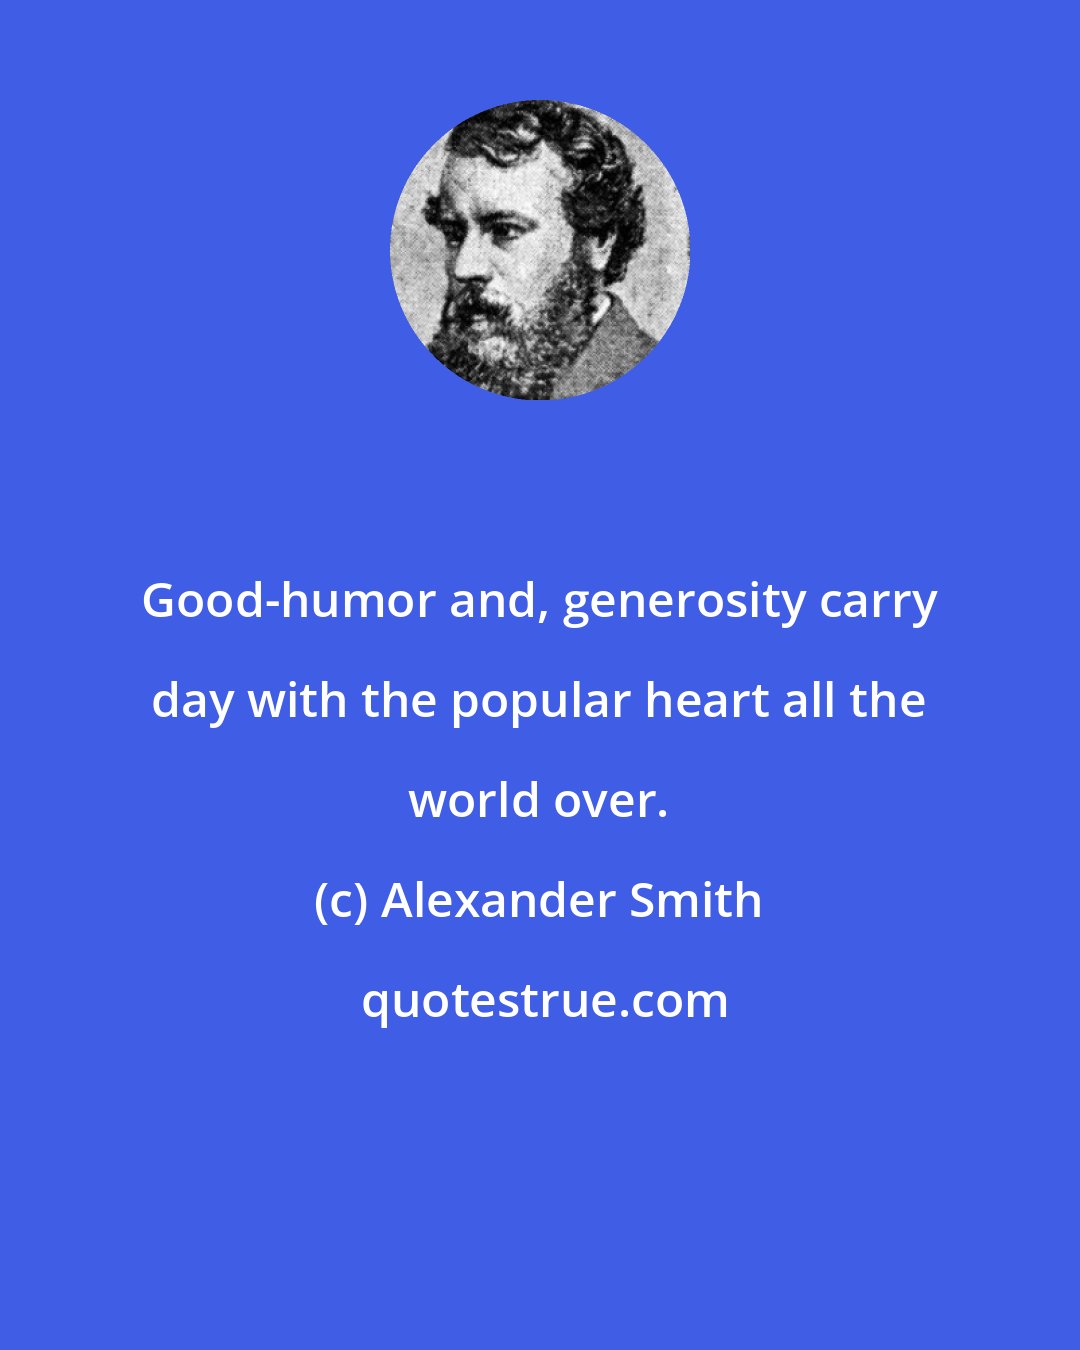 Alexander Smith: Good-humor and, generosity carry day with the popular heart all the world over.